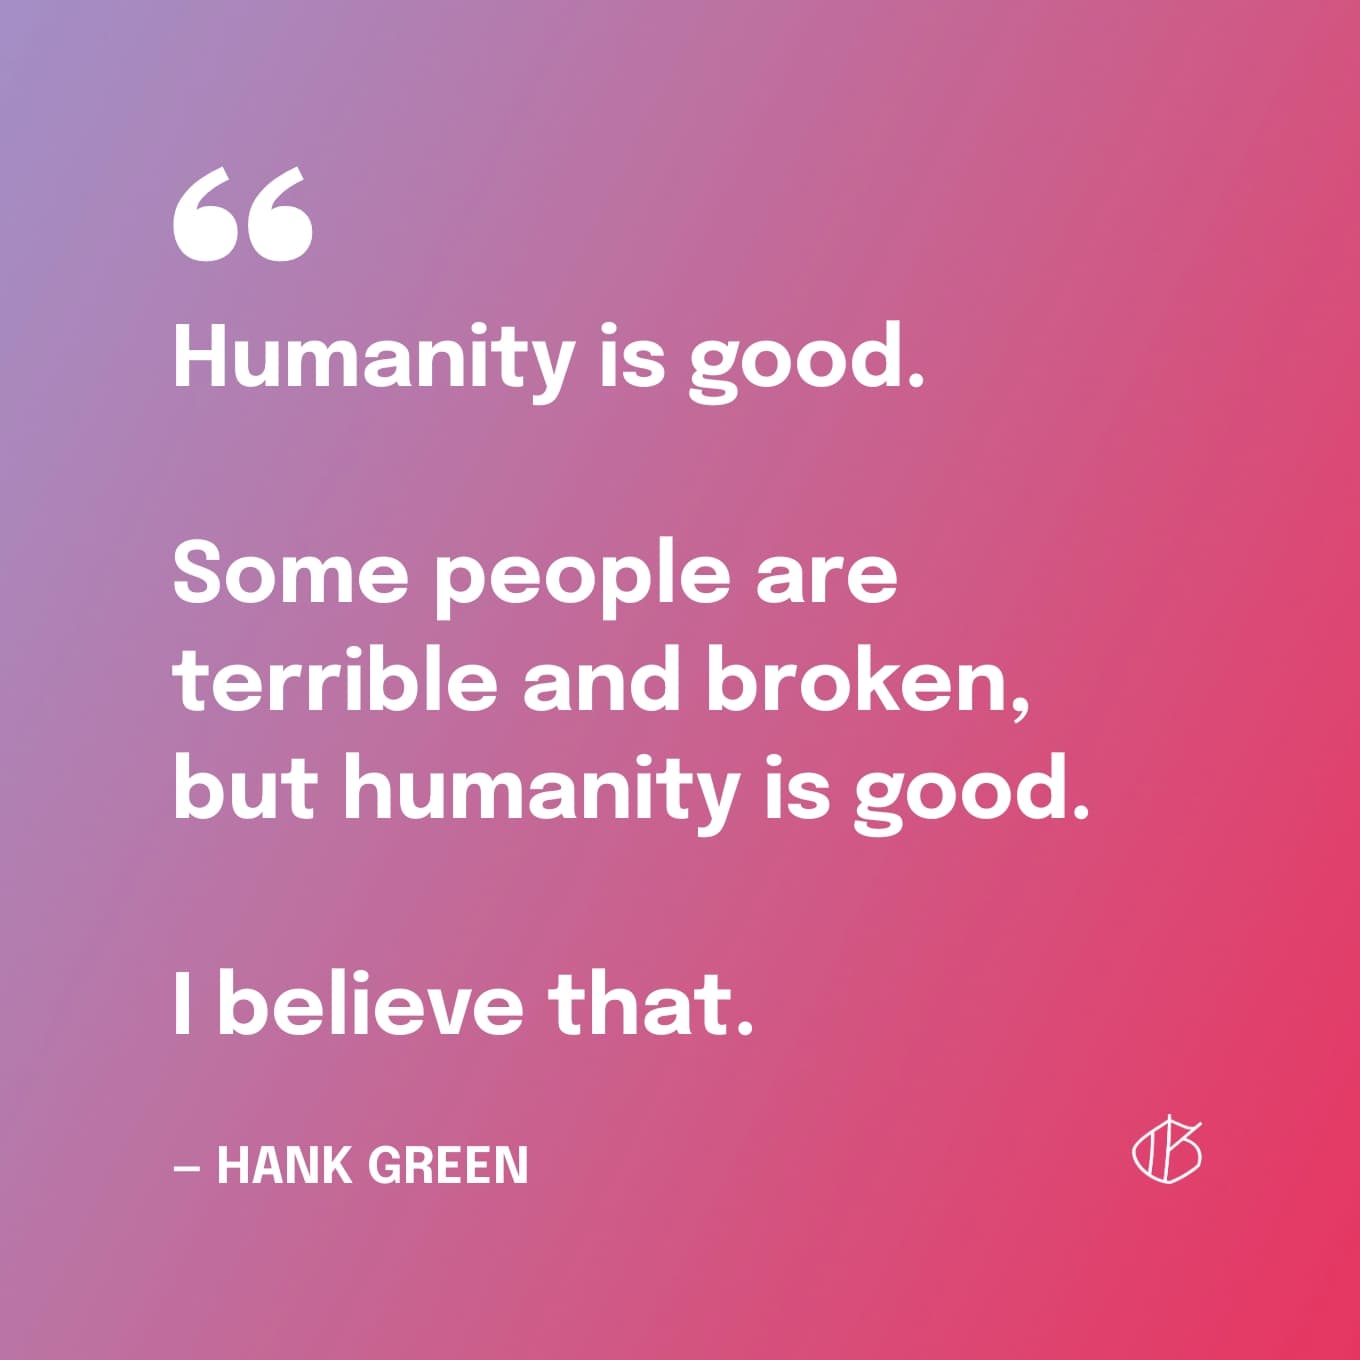 “Humanity is good. Some people are terrible and broken, but humanity is good. I believe that.” ― Hank Green